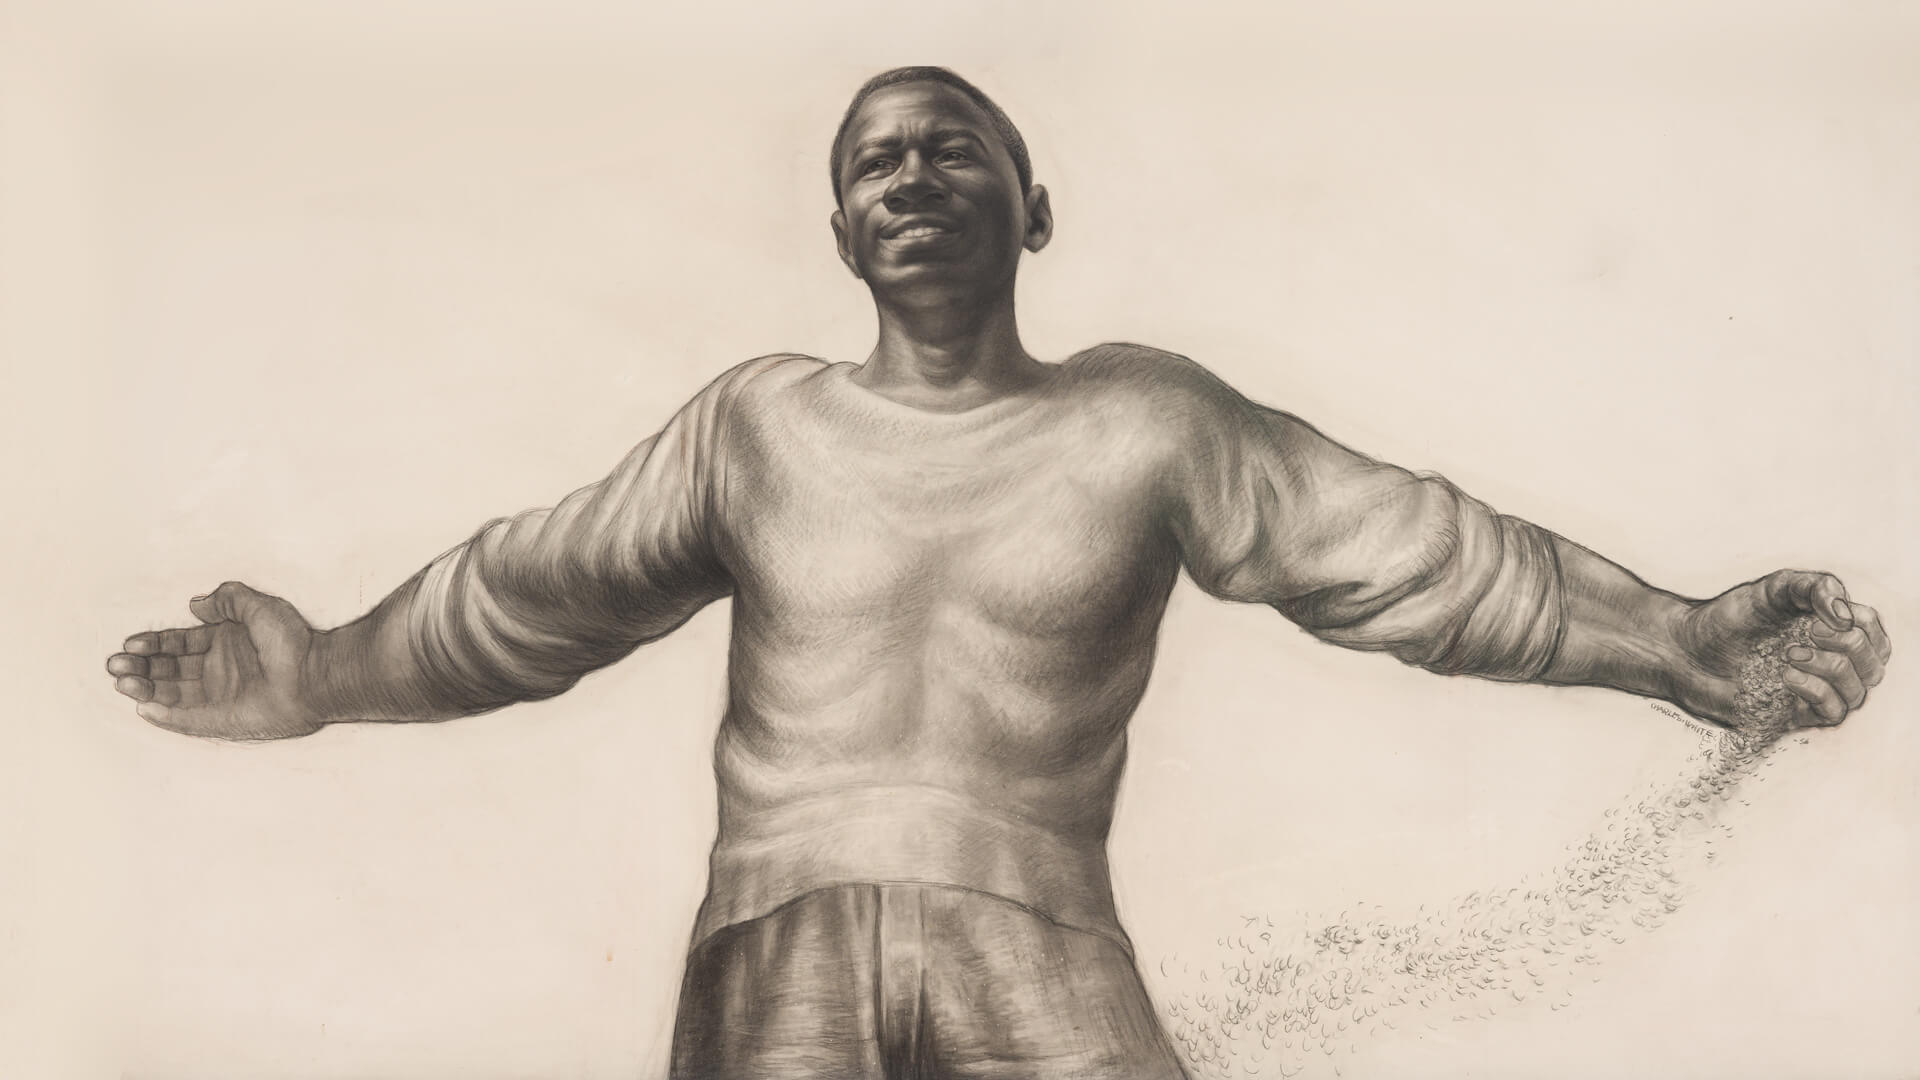 Charles White, O Freedom, 1956, courtesy of Rennie Collection, Vancouver, photo by Blaine Campbell